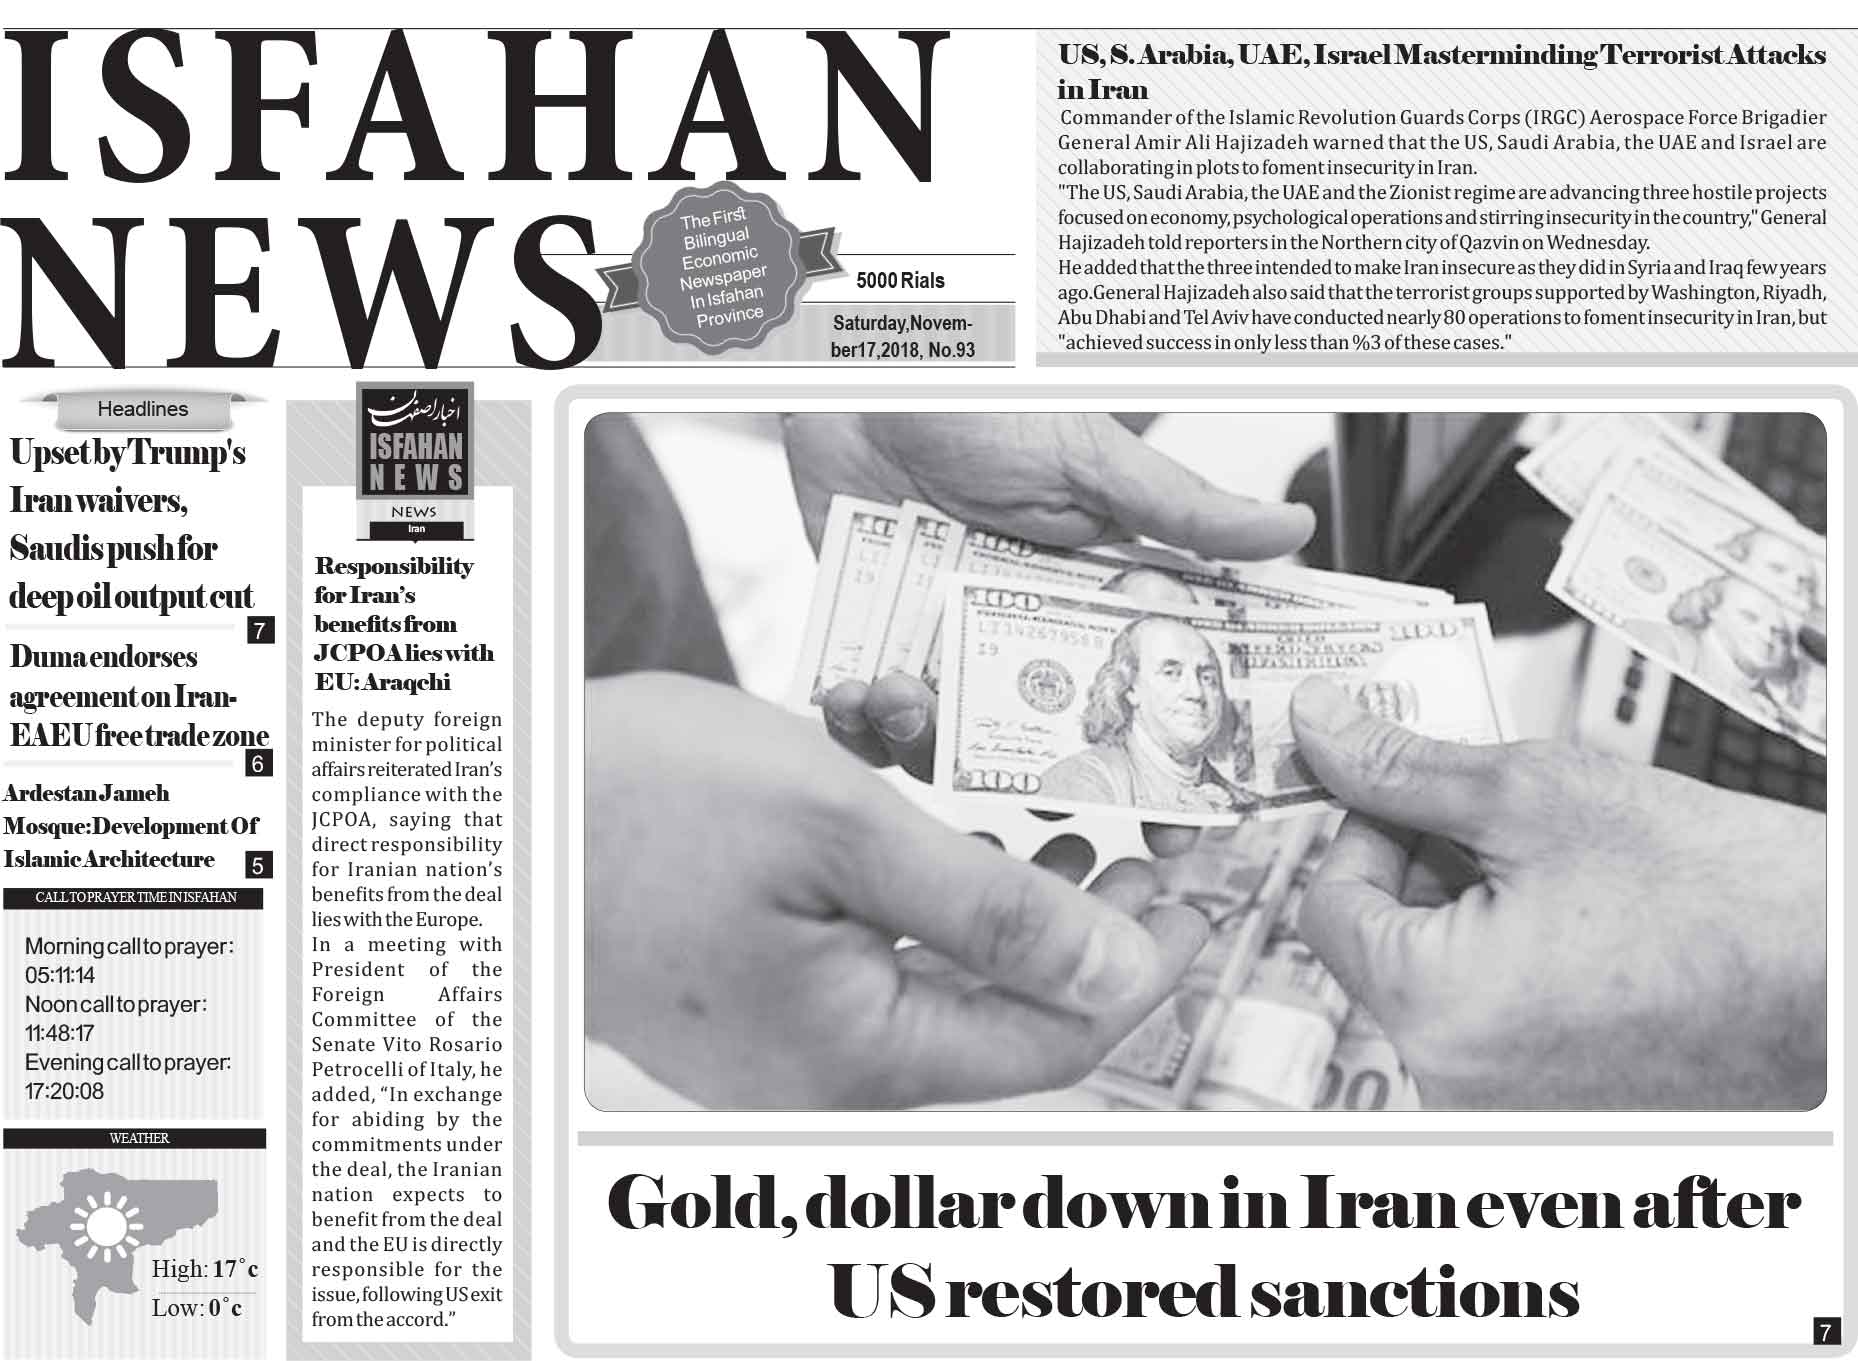 Gold,dollar down in Iran even after US restored sanctions